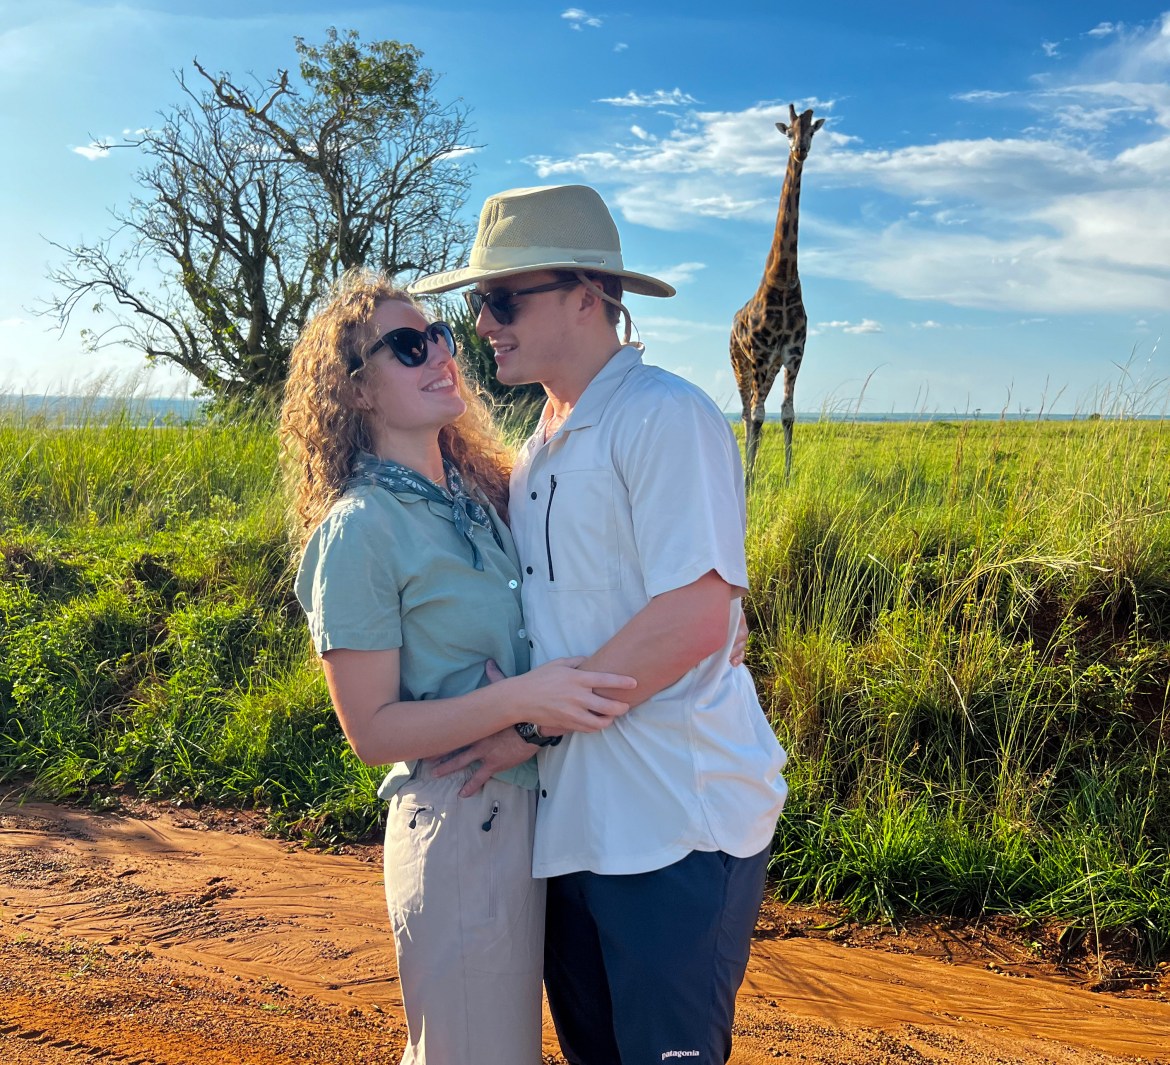 Alanna and Luke on their travels together in Africa. There is a giraffe in the background. Luke is standing with Alanna, wearing a white shirt and a hat. Alanna is wearing a buttoned blue shirt and shorts.